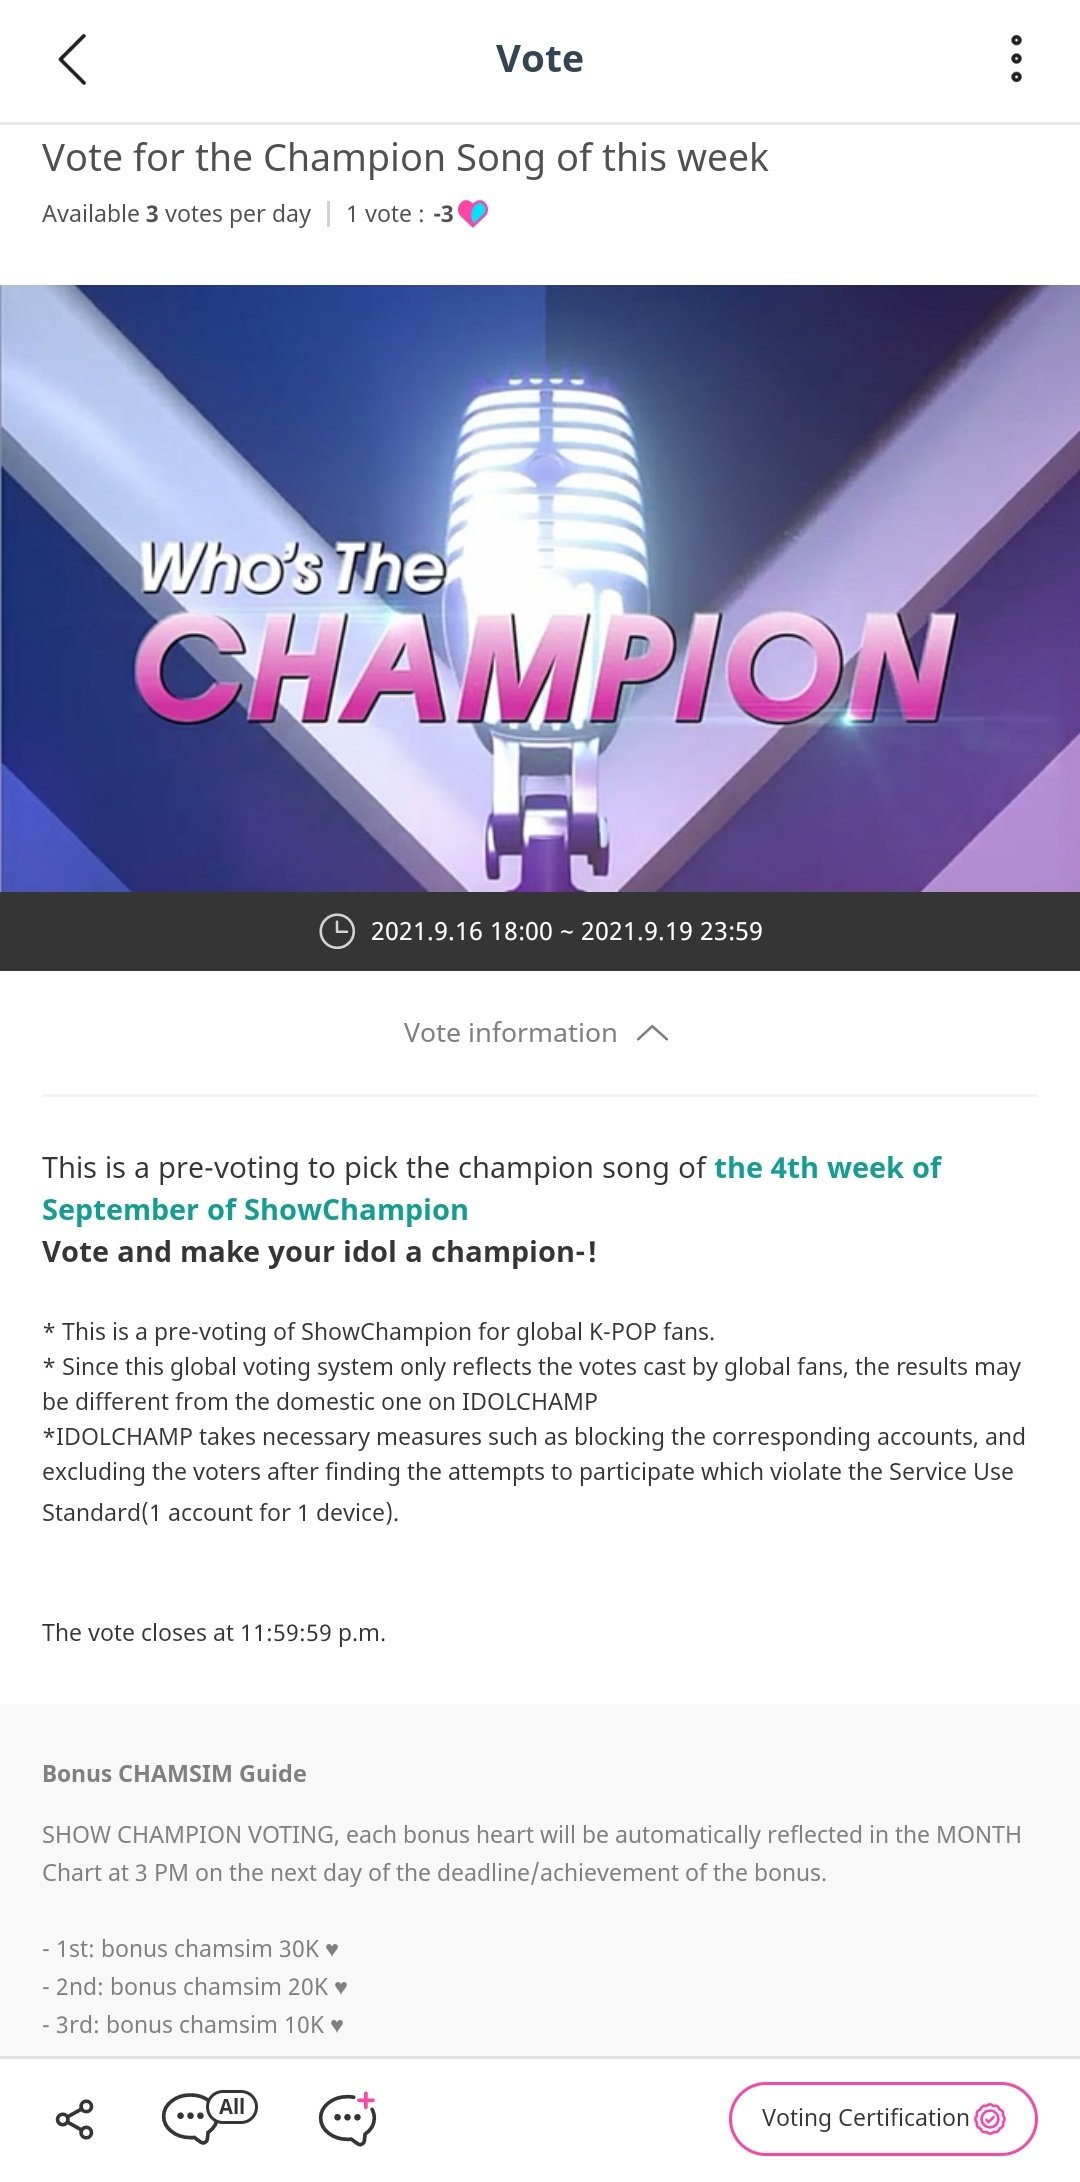 ATEEZ System on Twitter: MBC SHOW CHAMPION PRE-VOTING Show Champion pre voting has now started! Cast your votes for @ATEEZofficial on Idol Champ! →(https://t.co/zLIV1doY2X) #ATEEZ | #에이티즈 https://t.co/iMKpQcpjPp" / Twitter